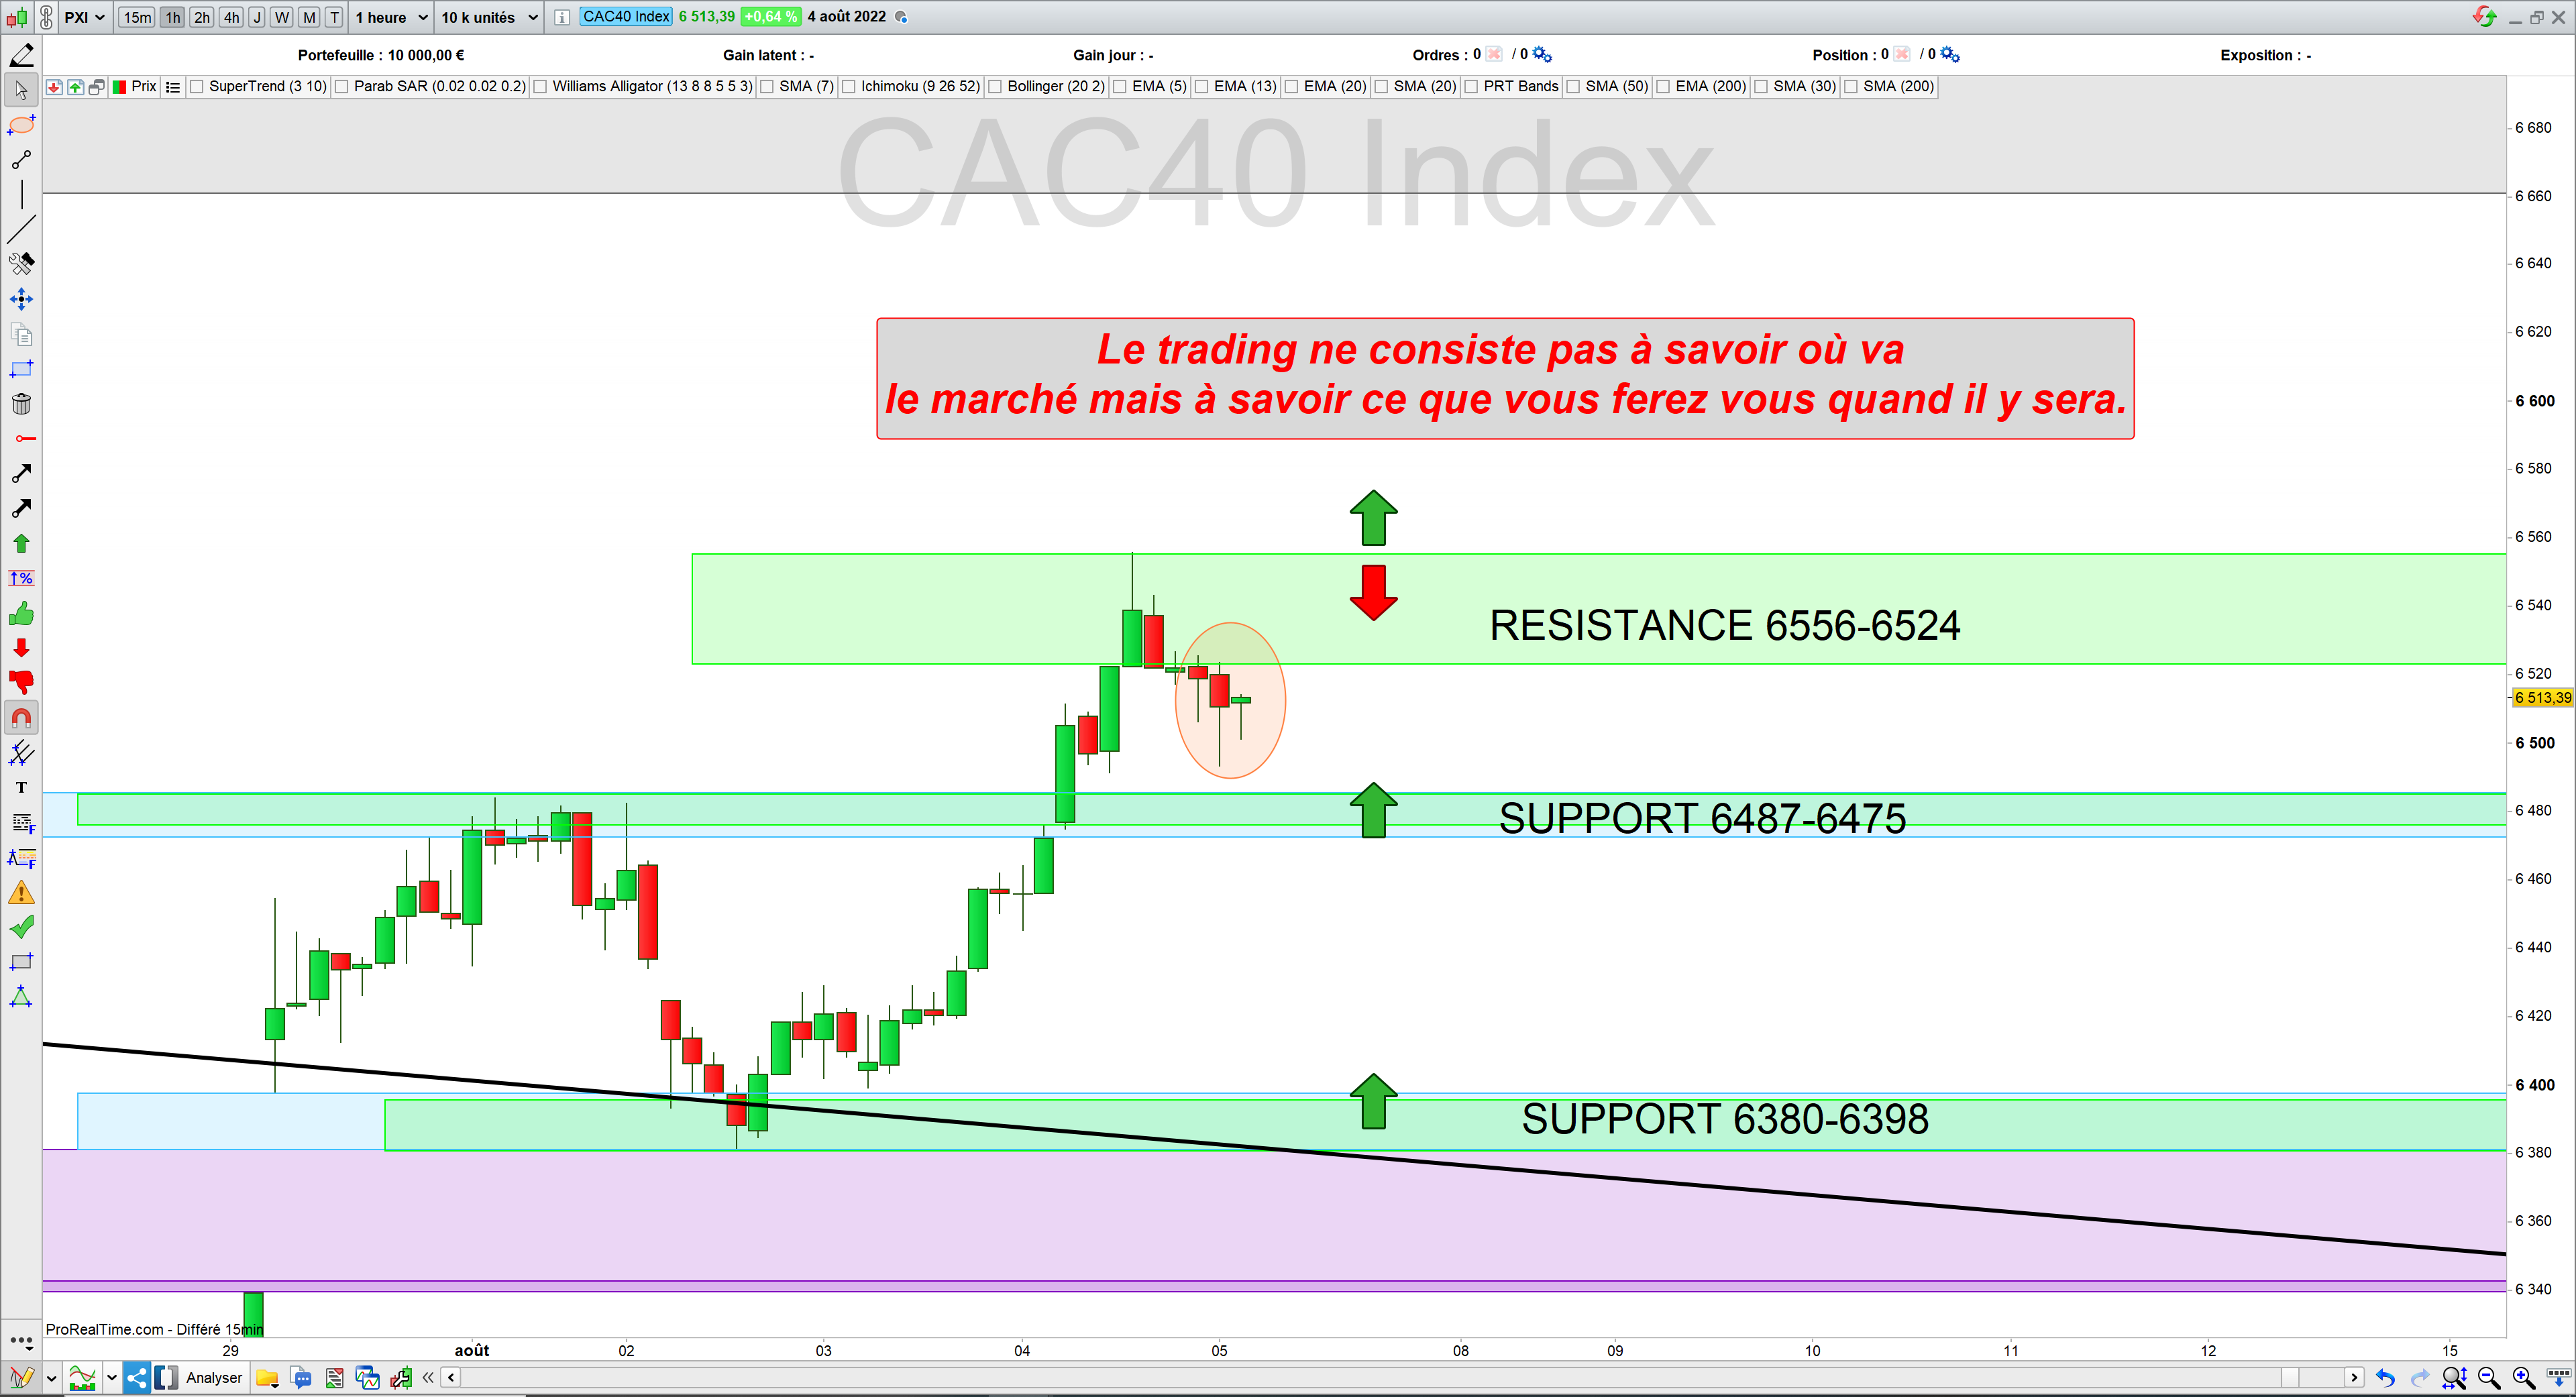 Trading cac40 05/08/22